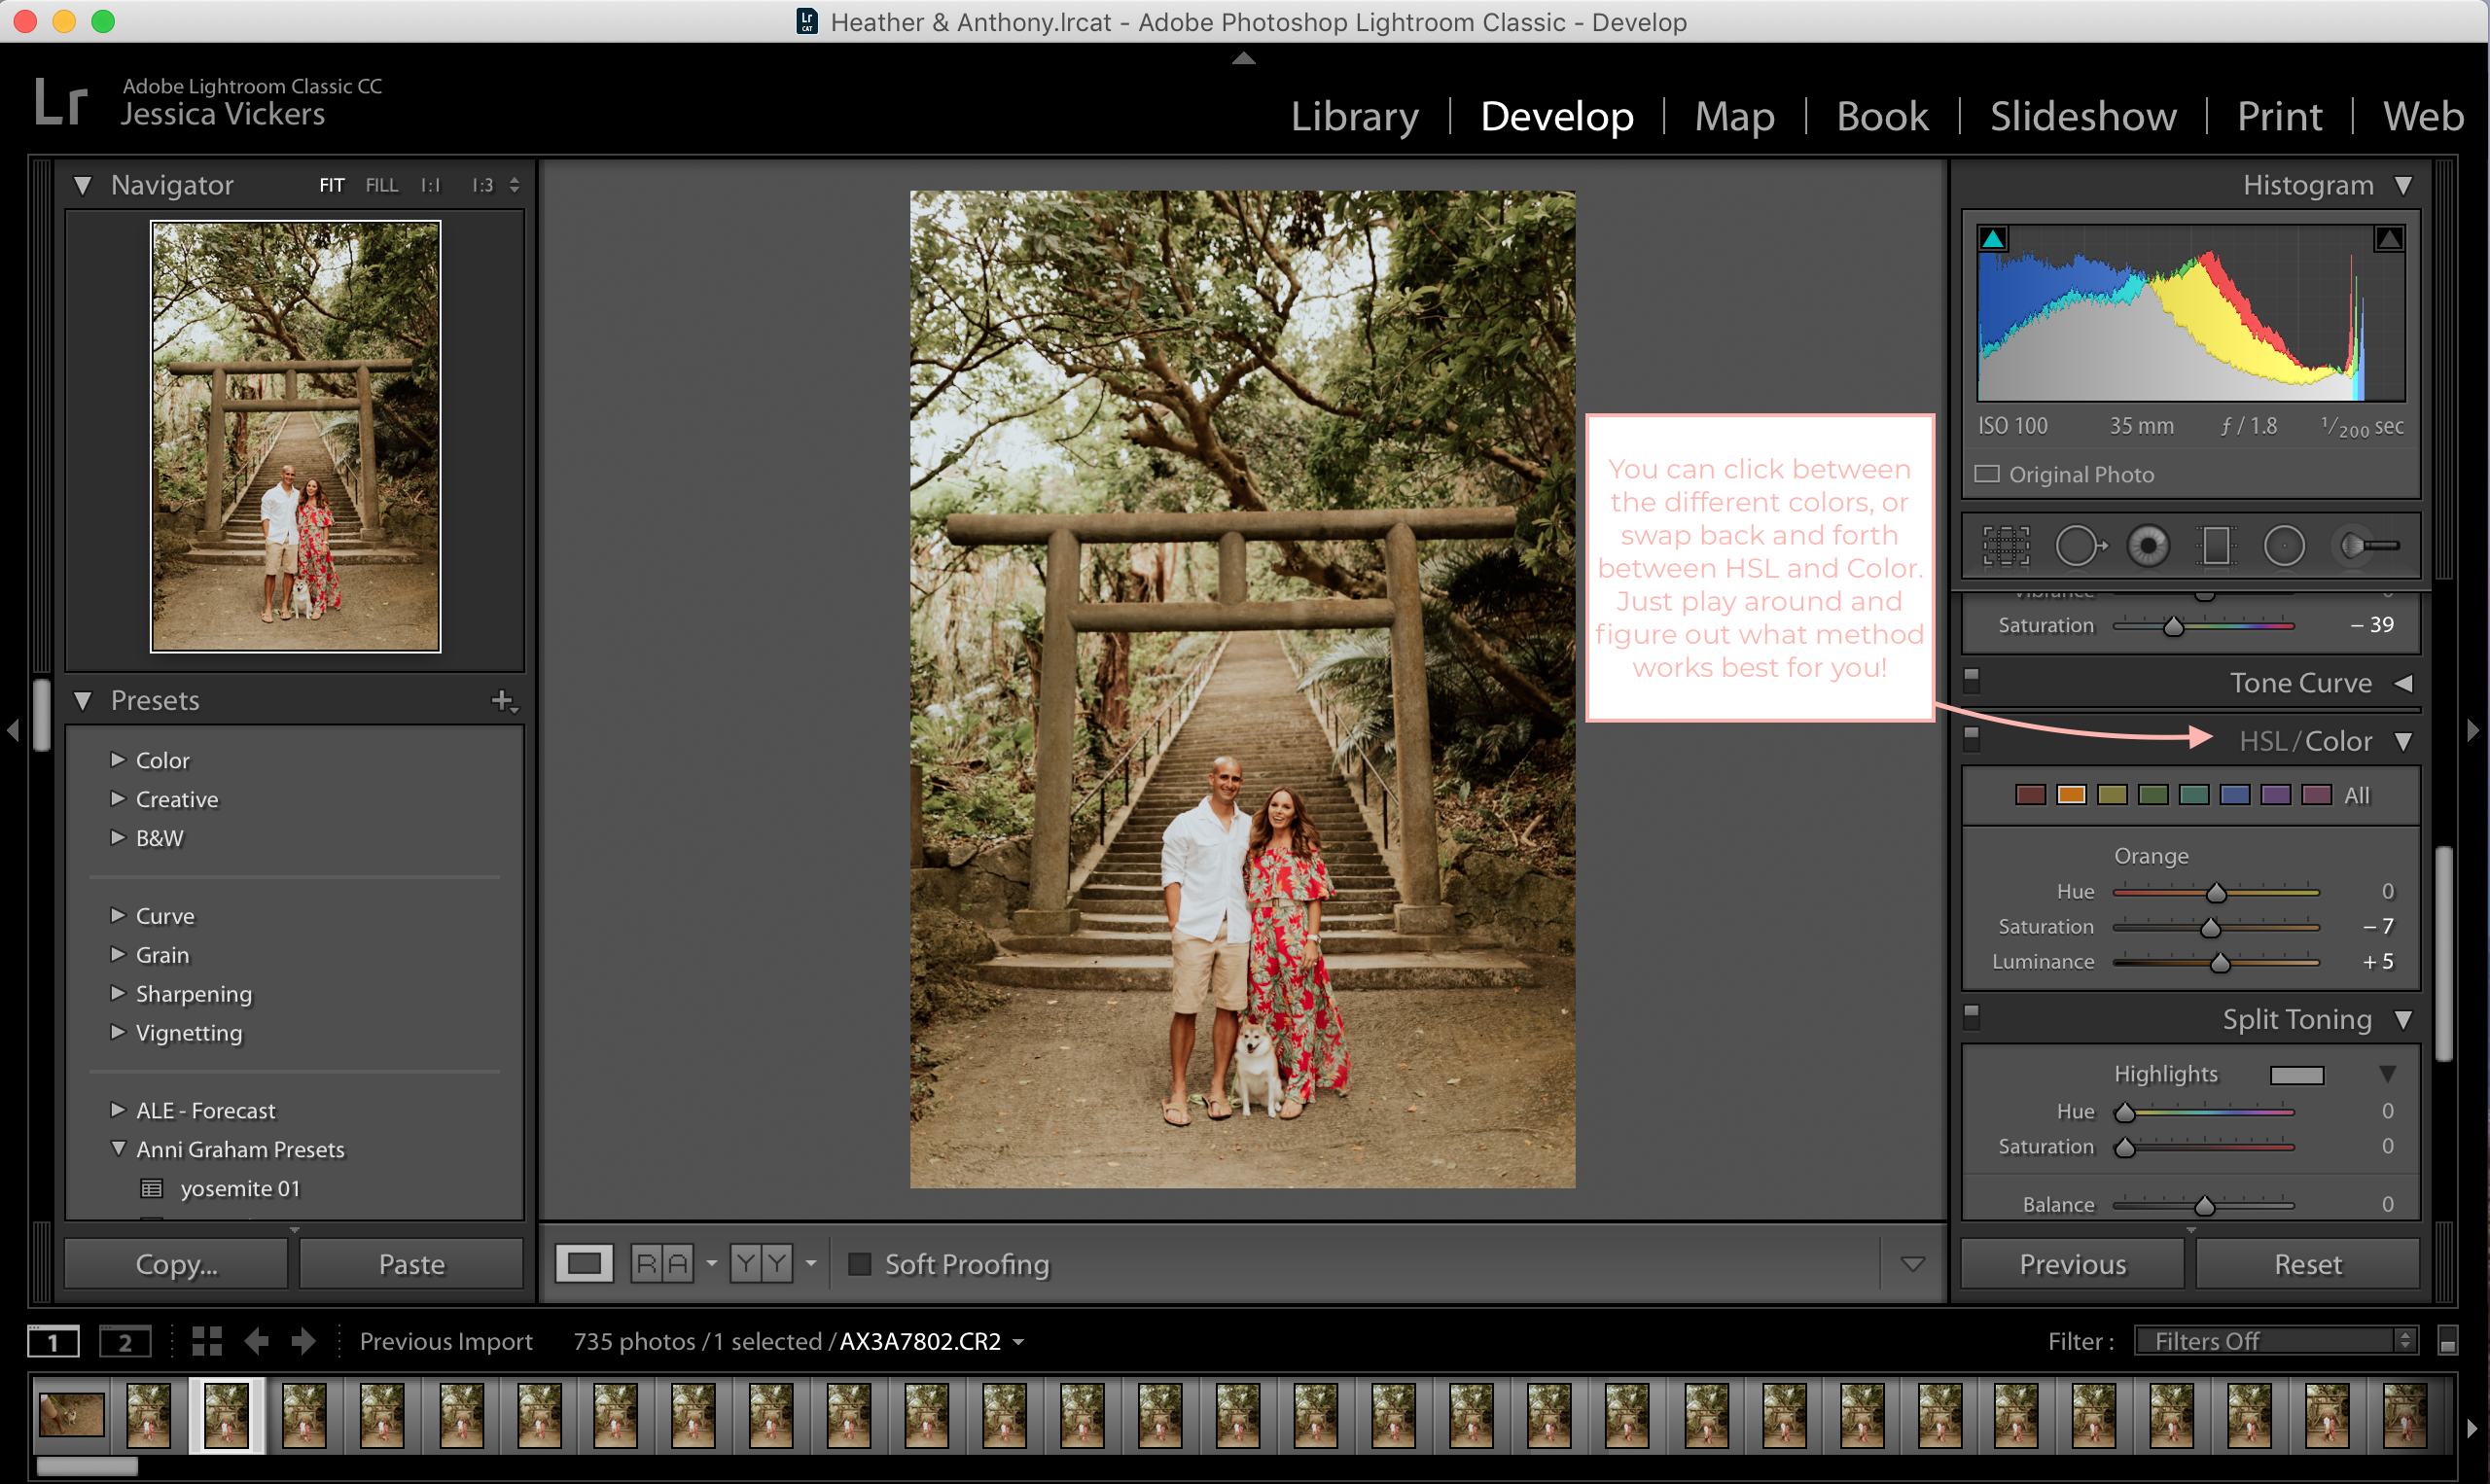 Feel like there's stuff in Lightroom you're missing? Tools that could make your editing workflow better? Here are 5 Lightroom tools you should be using.